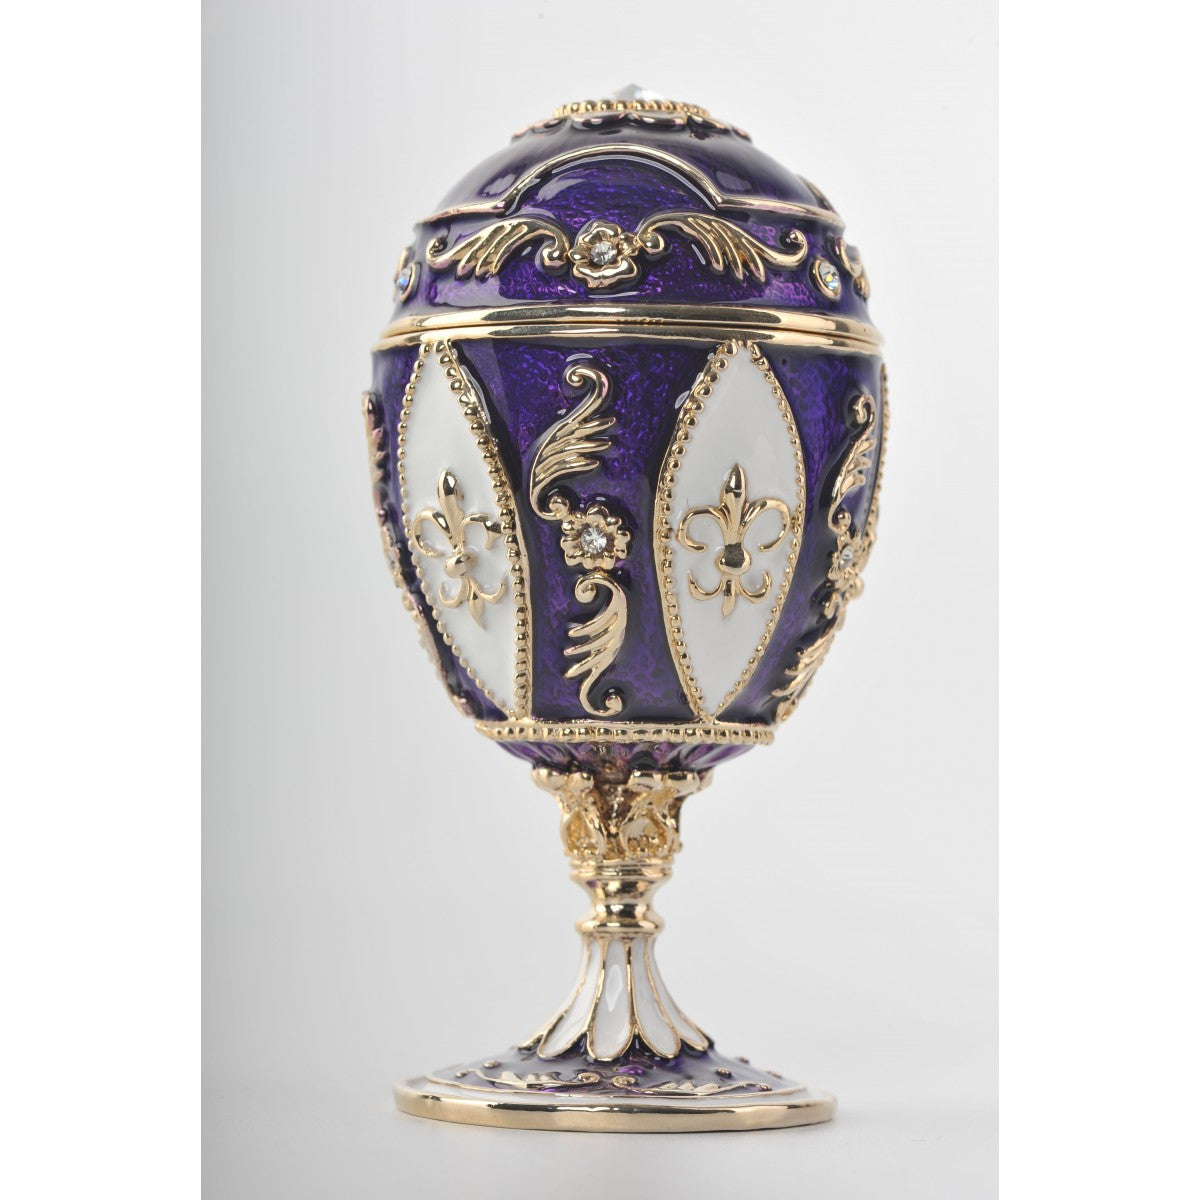 Faberge egg with chicken by Keren Kopal